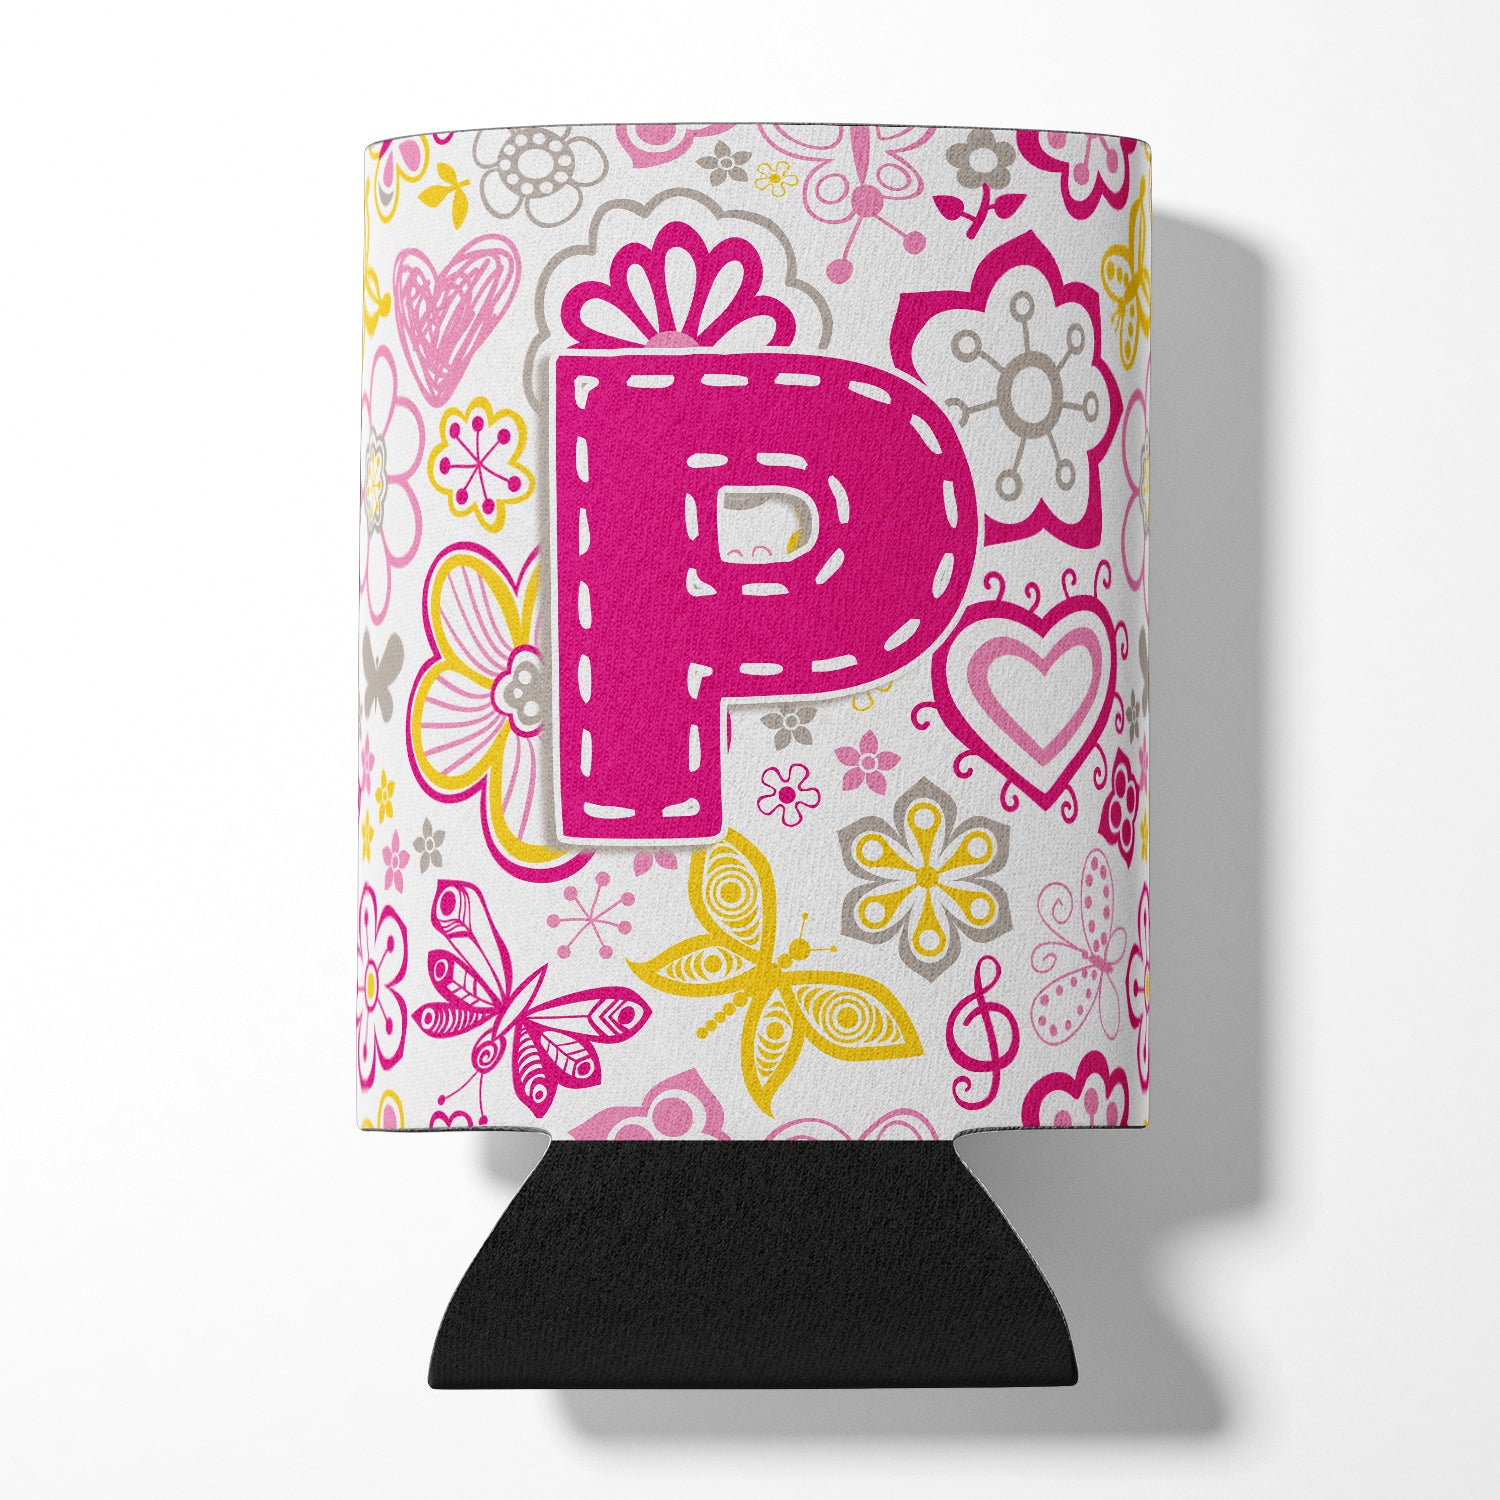 Letter P Flowers and Butterflies Pink Can or Bottle Hugger CJ2005-PCC.